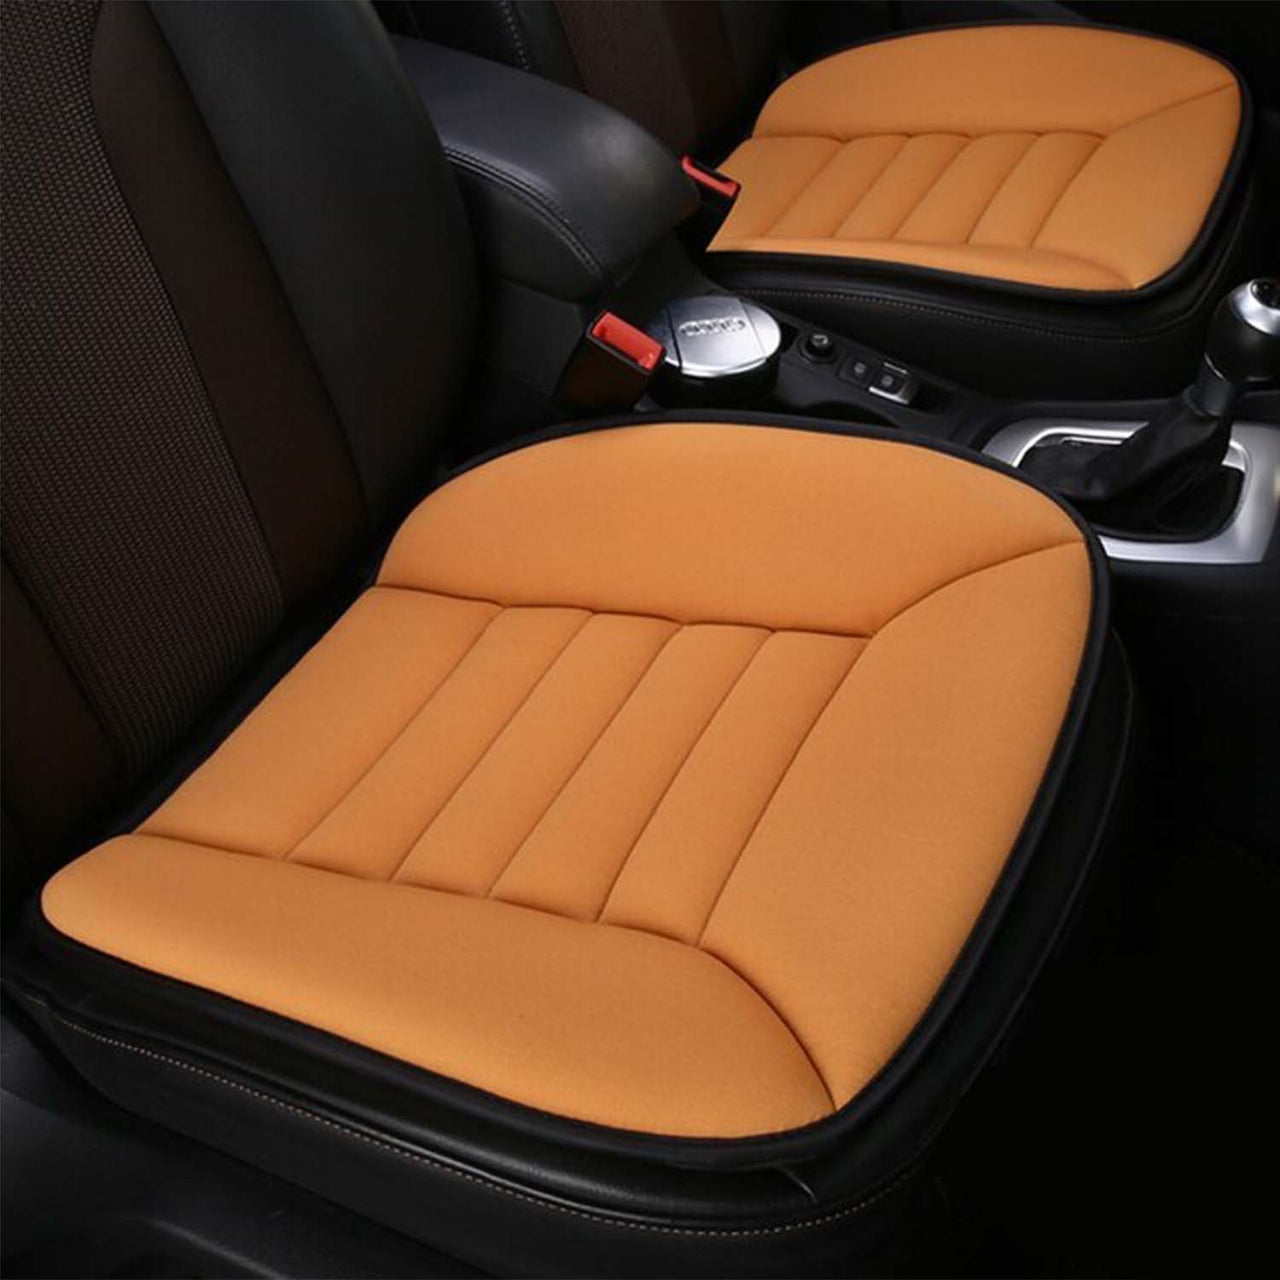 Car Seat Cushion with 1.2inch Comfort Memory Foam, Custom Fit For Your Cars, Seat Cushion for Car and Office Chair MY19989